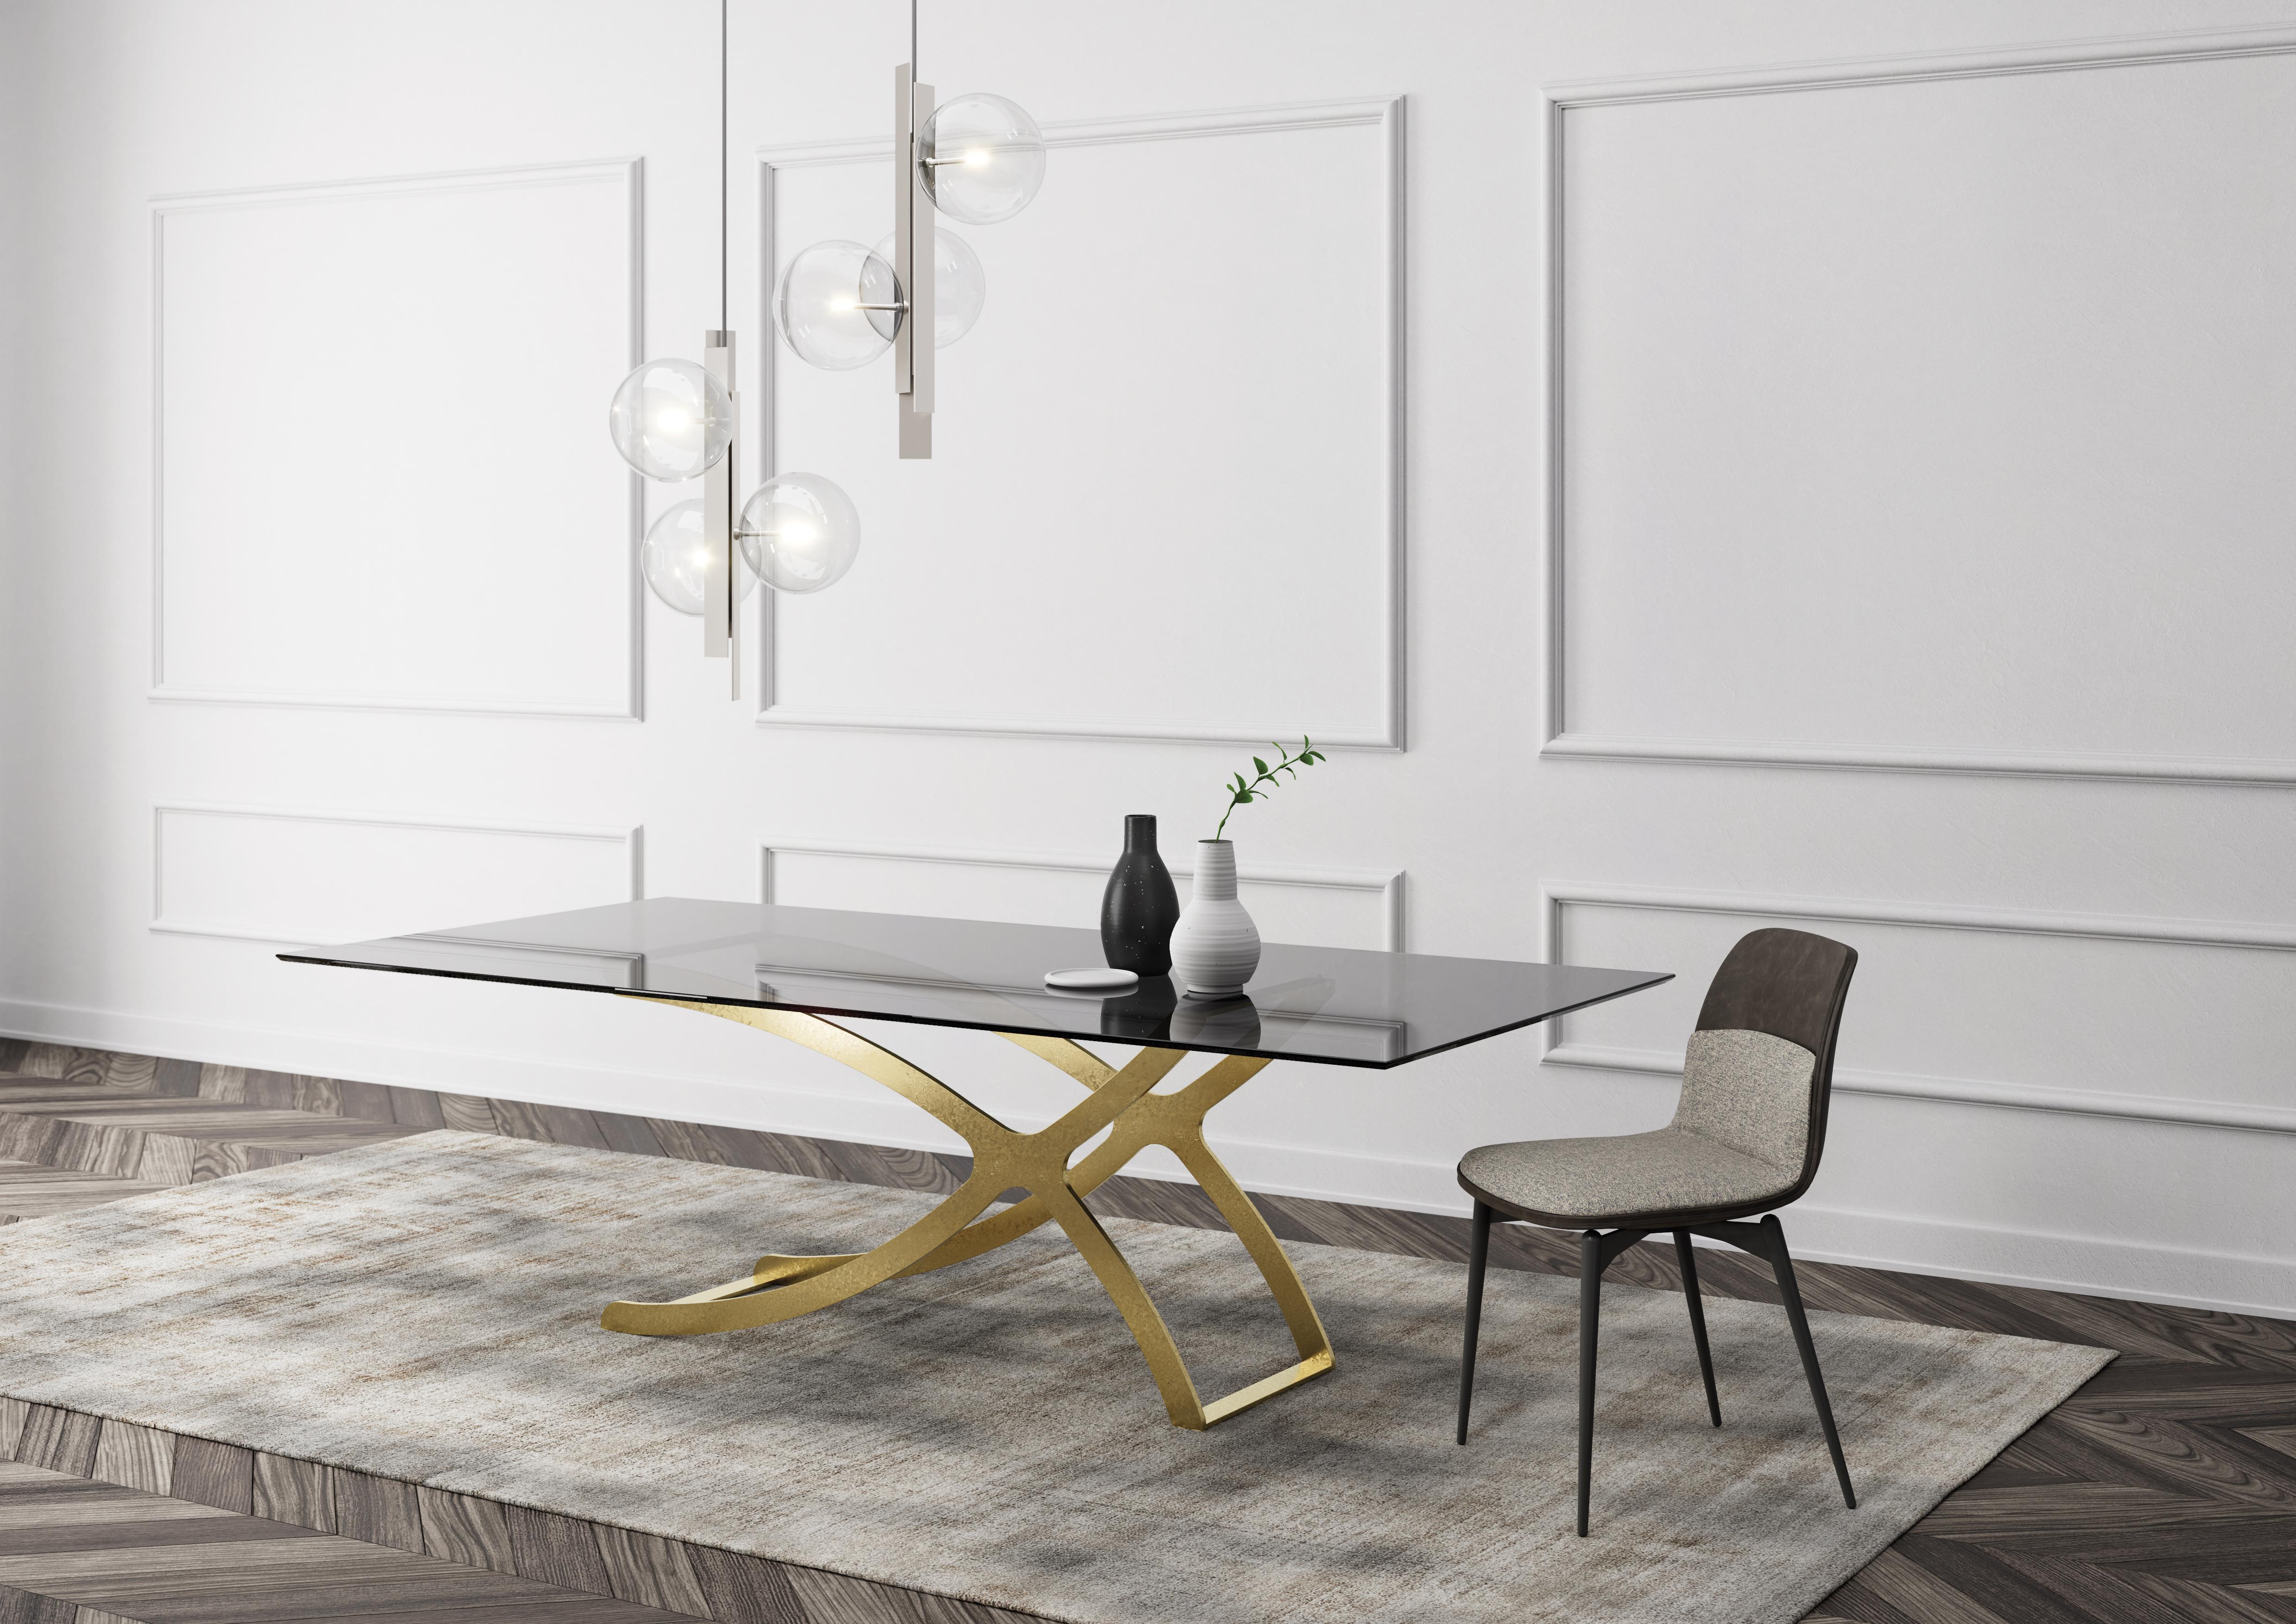 Apollo Dining Table by Chinellato Design
Dimensions: W 250 x D 120 x H 72 cm
Materials: Top: Smooth smoked tempered glass
Base: Chabin gold-finished.


The base, crafted from worked and welded steel, is available in Chabin Gold or Matte Black Paint